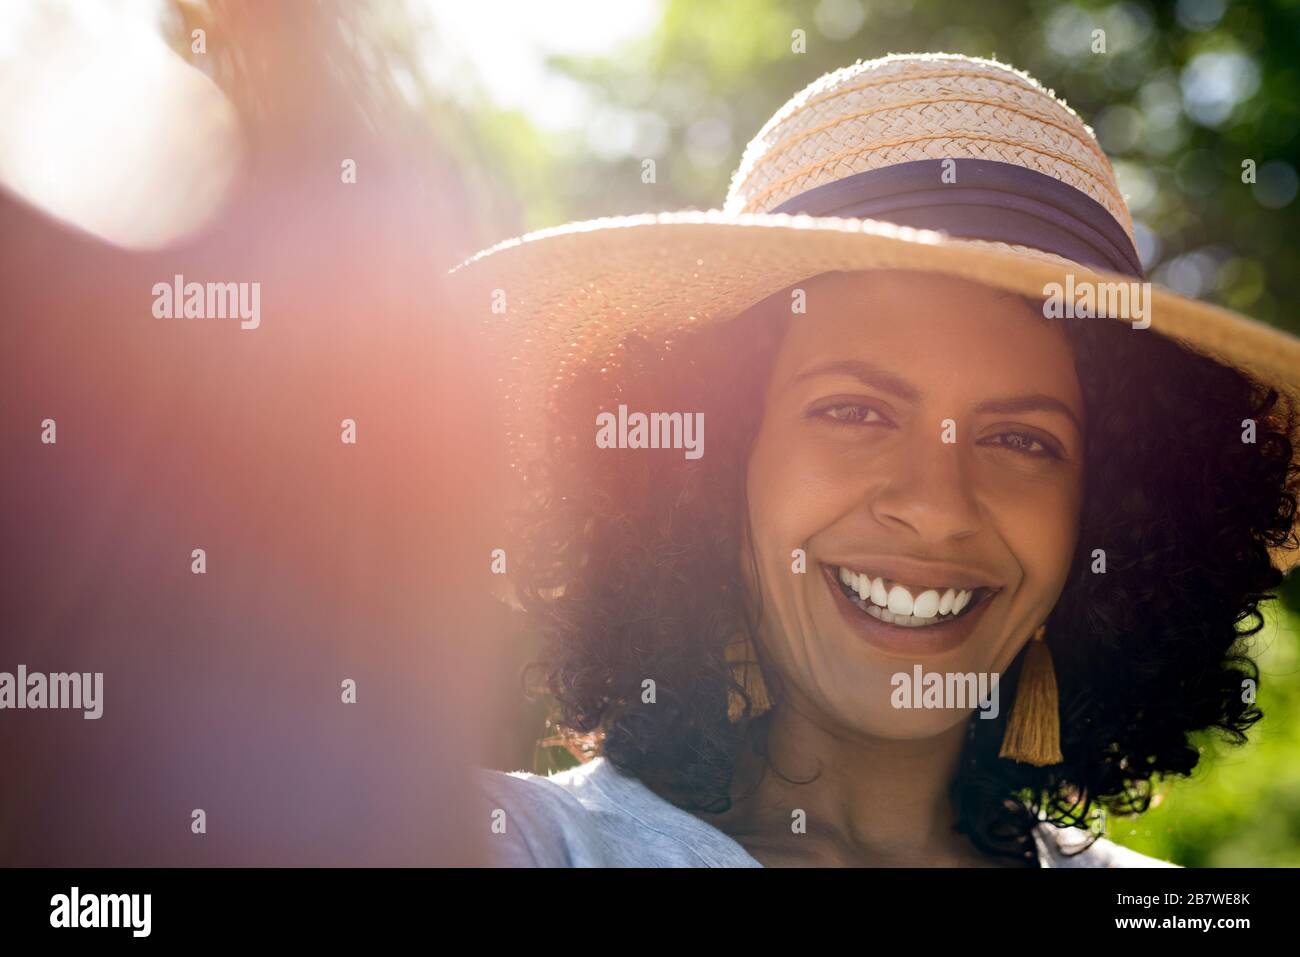 Smiling woman wearing a sun hat and talking selfies Stock Photo